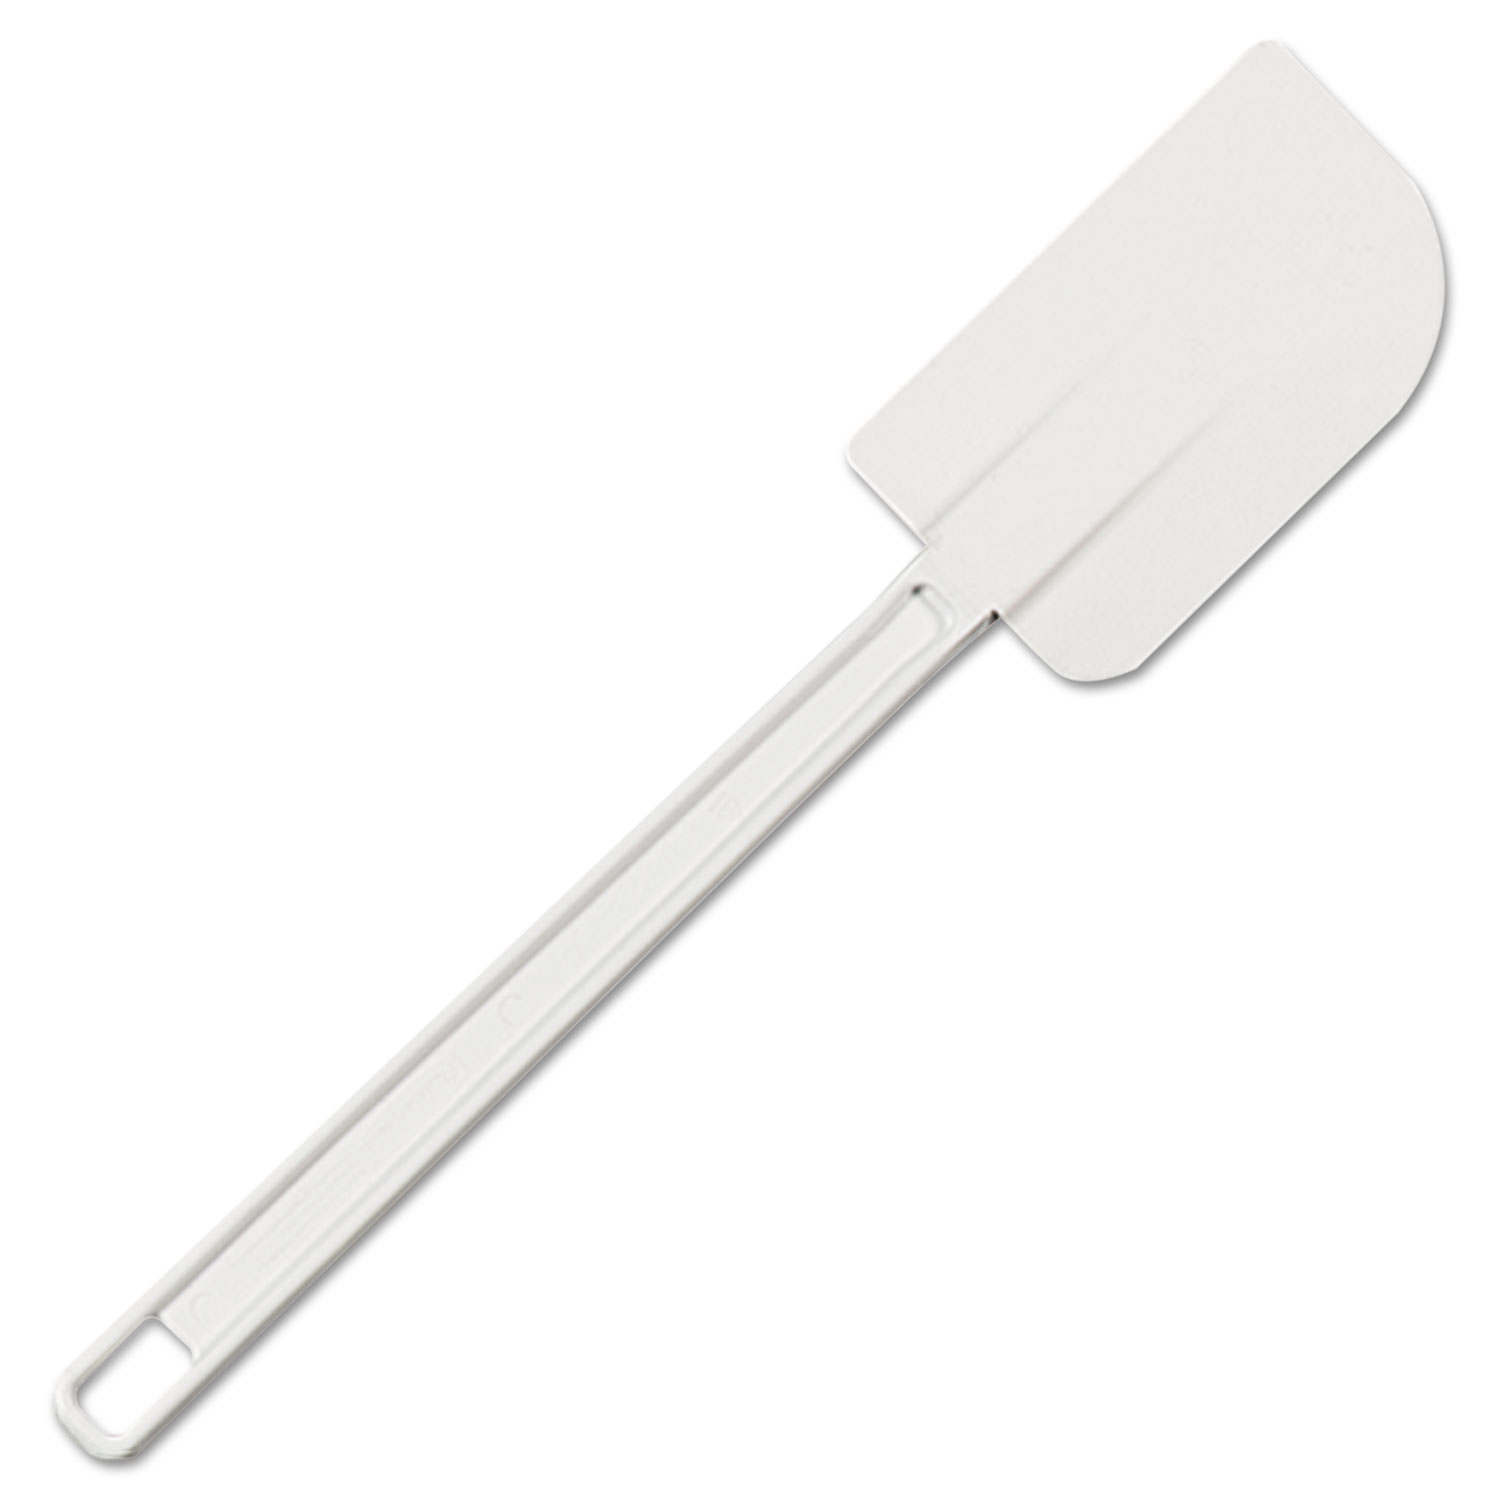  Rubbermaid Commercial 1905000000 Cook's Scraper, 13 1/2, White (RCP1905WHI) 